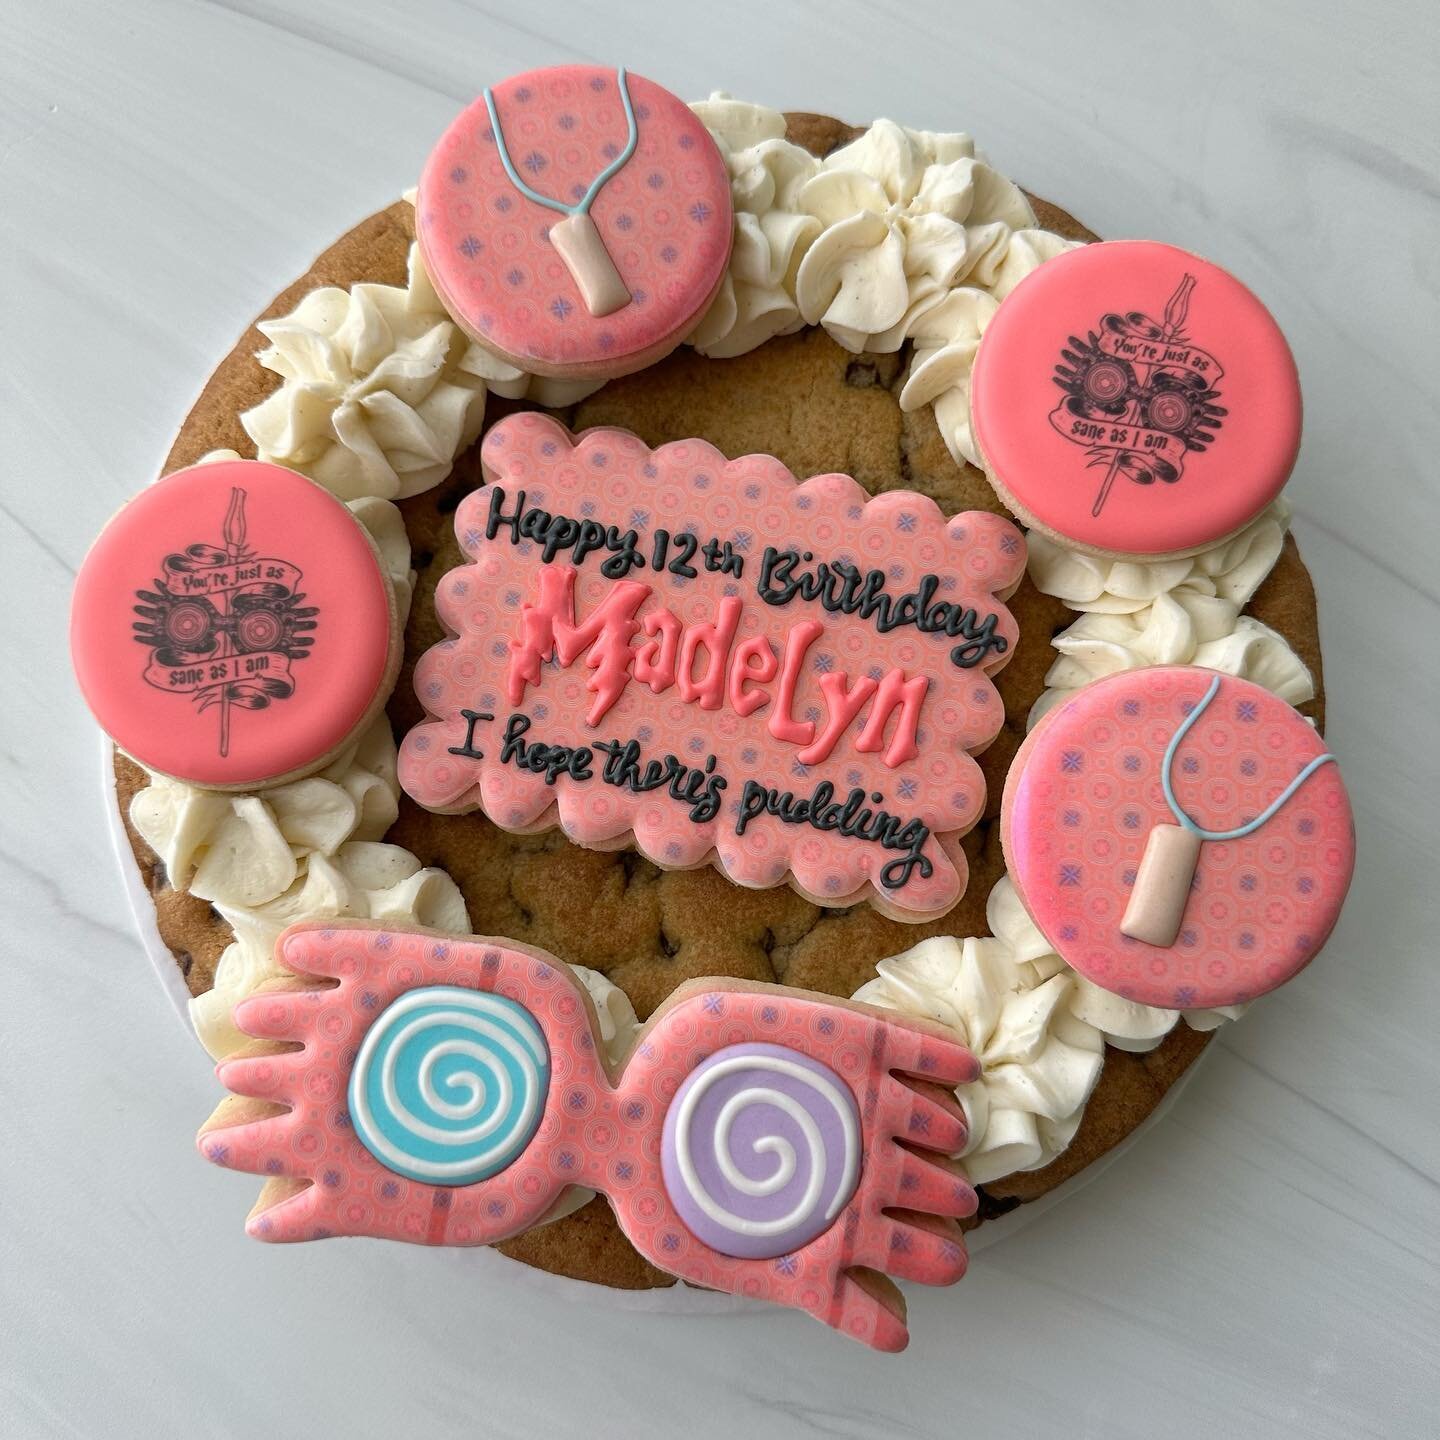 Being different isn't a bad thing. It means you're brave enough to be yourself 

- Luna Lovegood

#harrypottercookies #lunalovegood #lunalovegoodcookies #cookiecake #fulshearcookies #fulsheartx #customcookieshouston #ihopetherespudding #bedifferent #